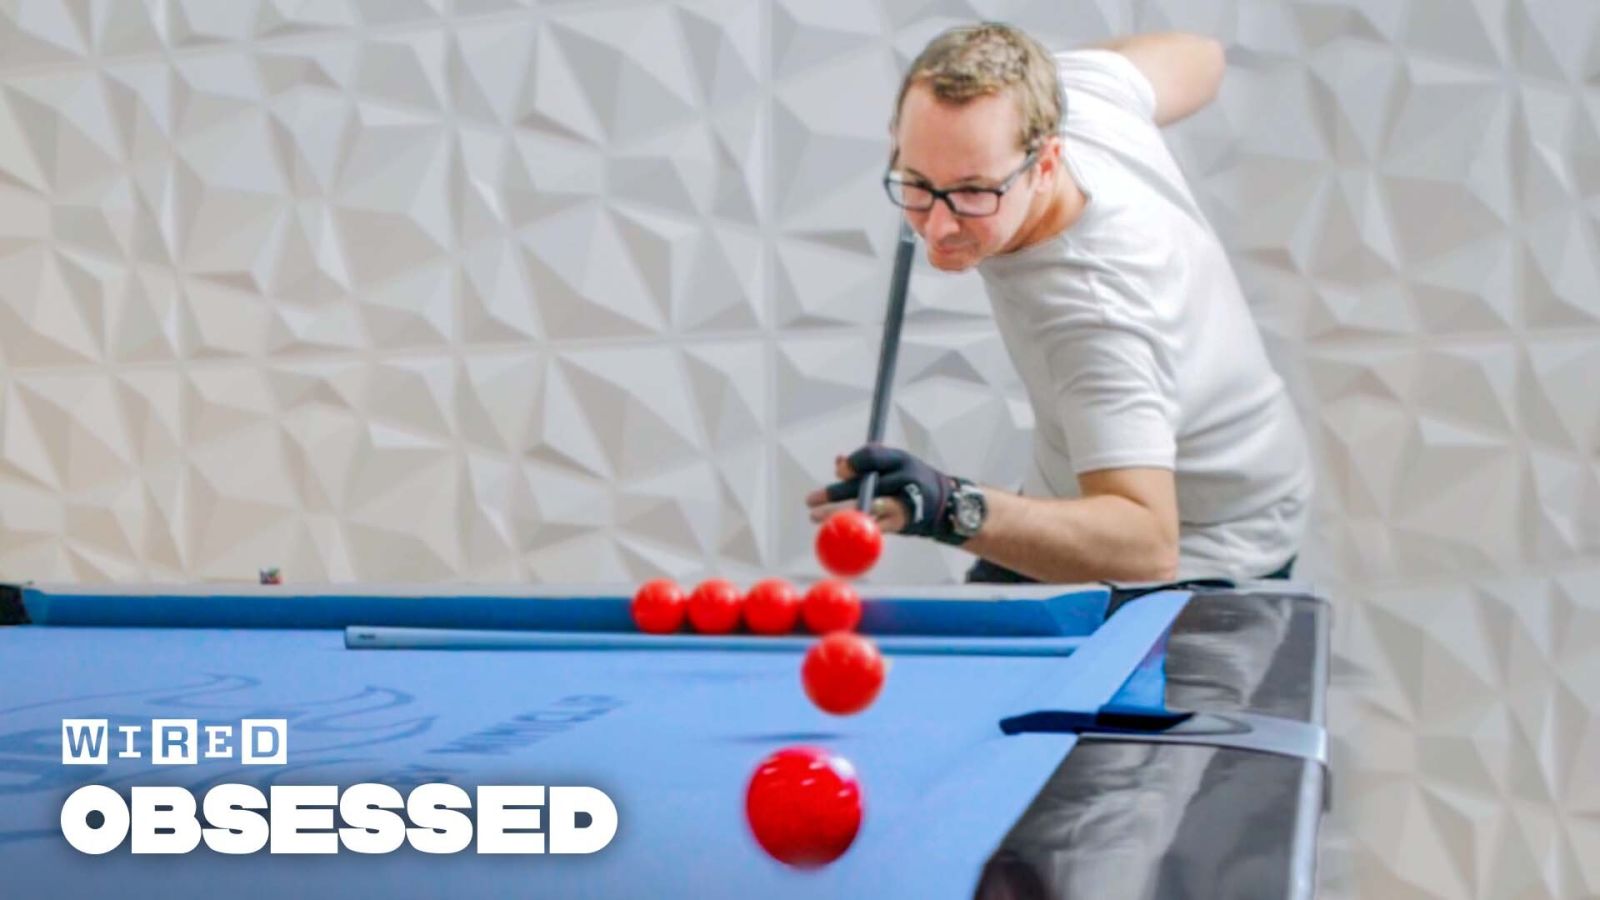 How This Trick Shot Artist Invented 10,000+ Pool Shots